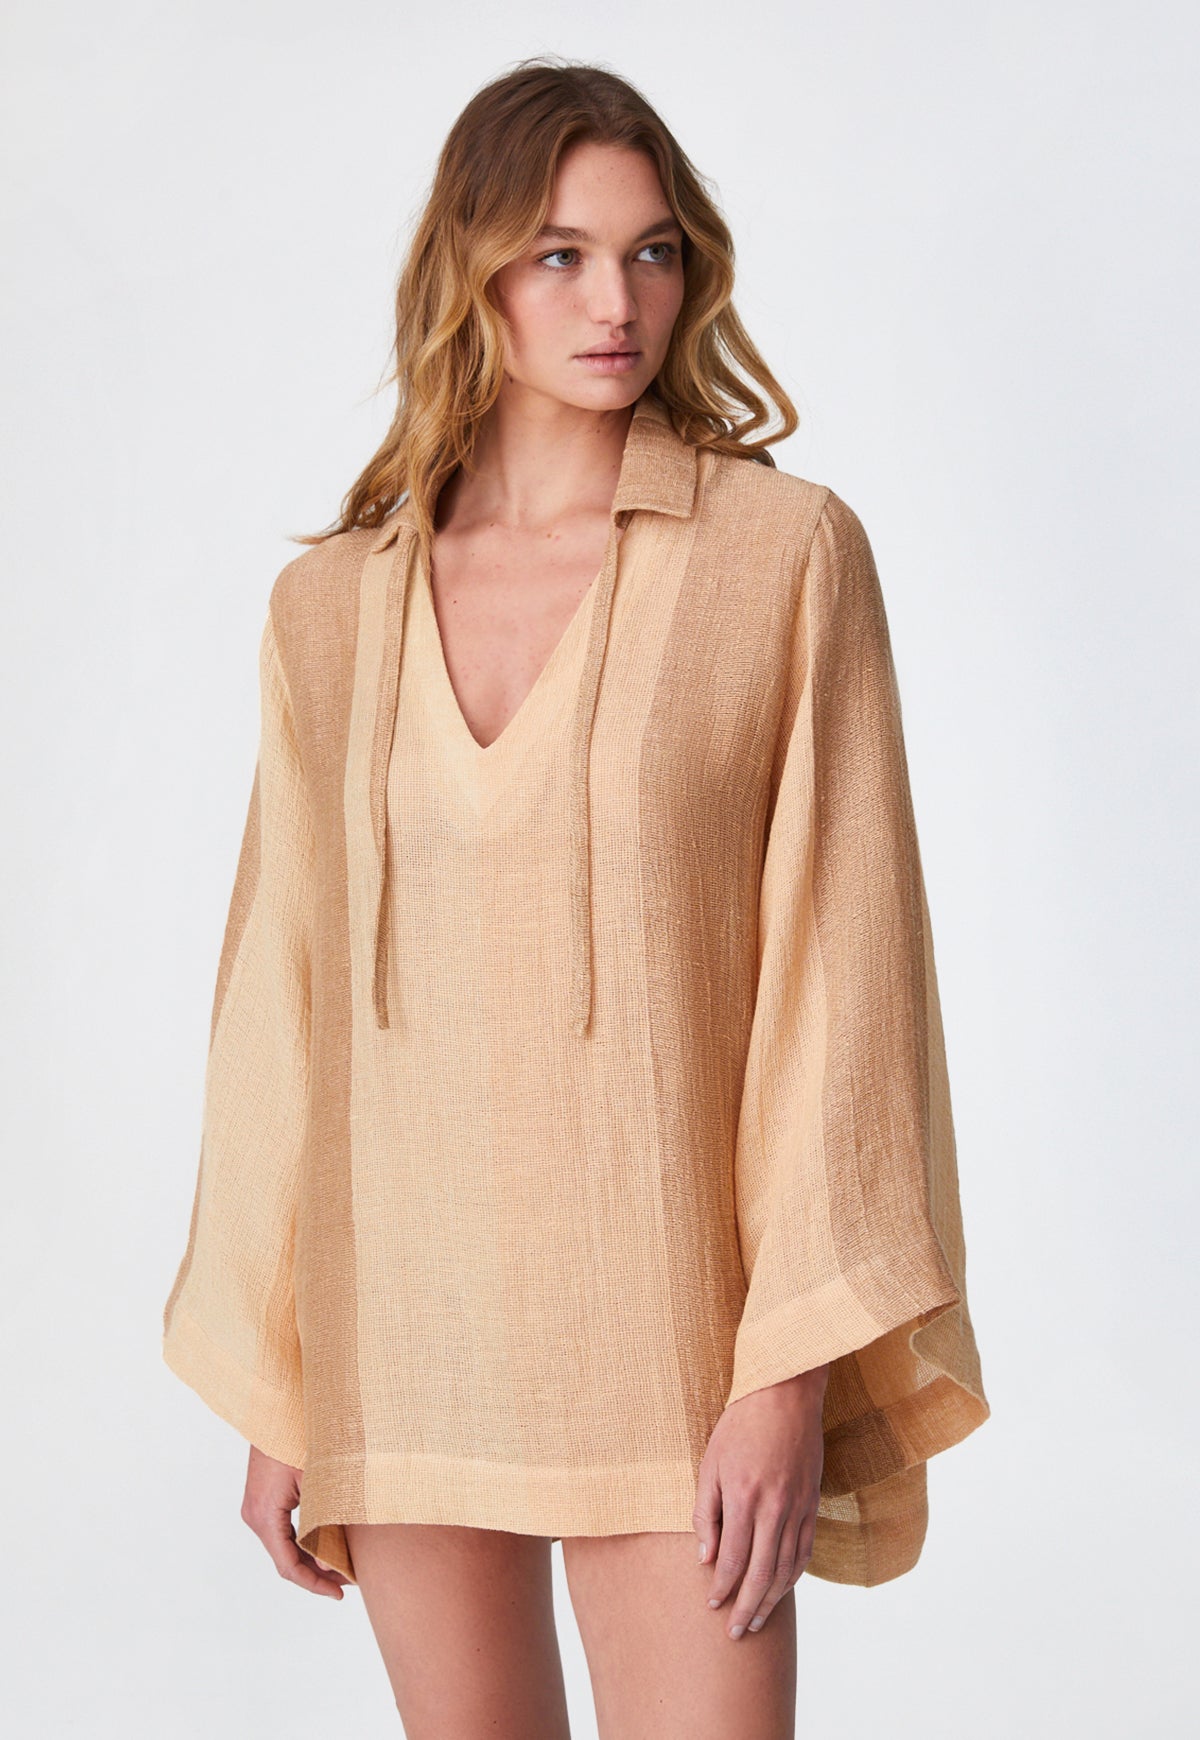 THE TUNIC TOP in DESERT AWNING STRIPED CHIOS GAUZE